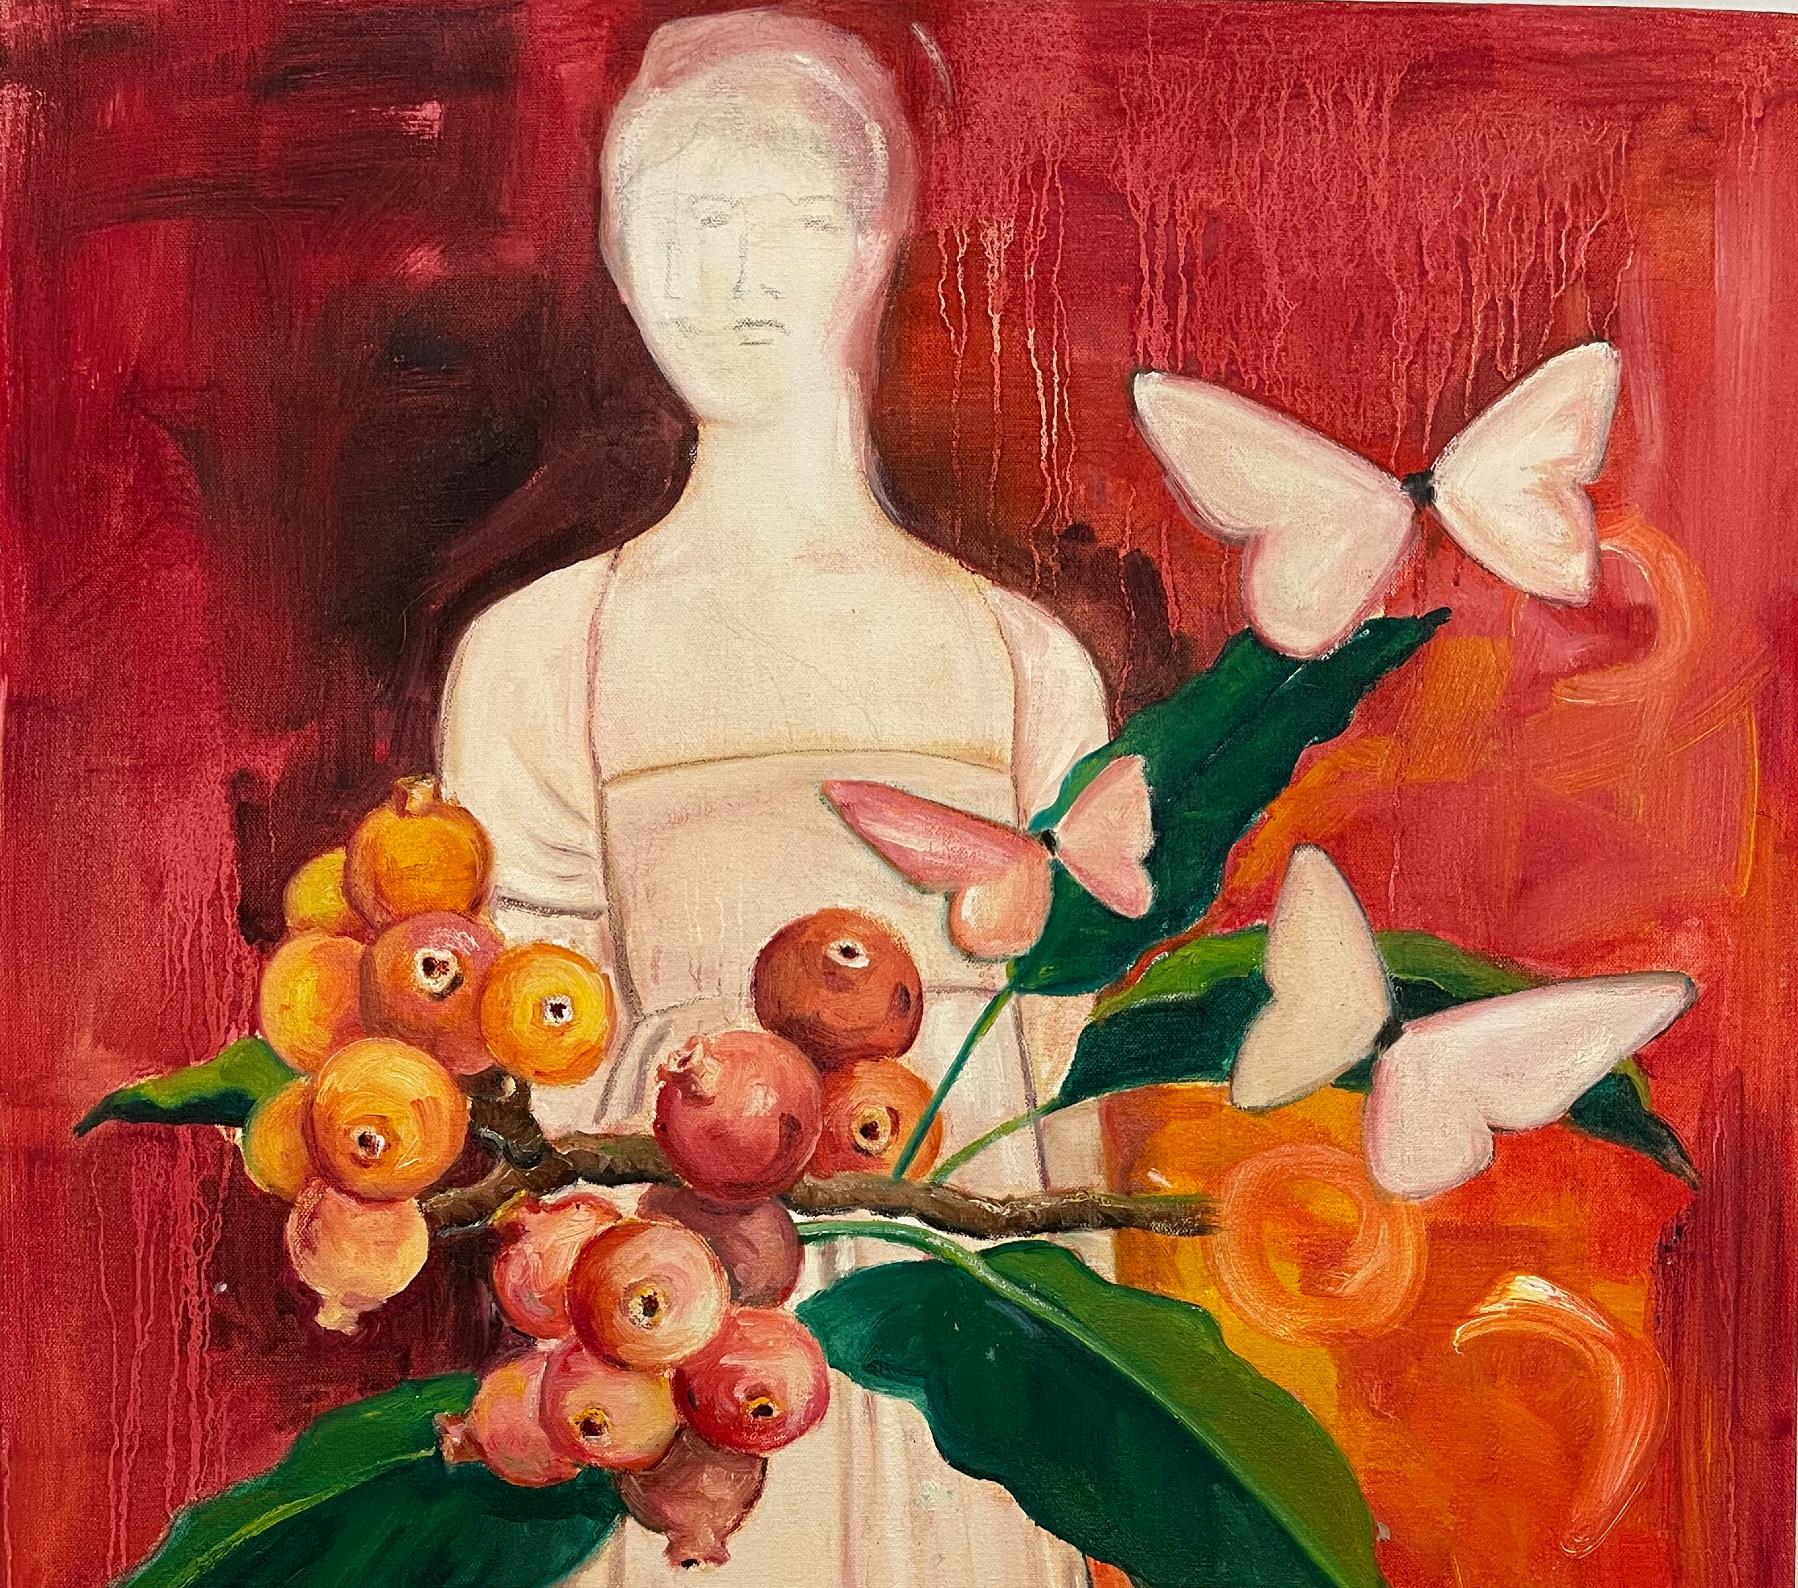 Belles Pommes  ,Oil on canvas by artist  Honora Jacob, is rich in color, symbols and imagery, Honora's work references a personal vocabulary of cultural, historical and organic elements that illustrate a narrative of the contemporary female psyche.